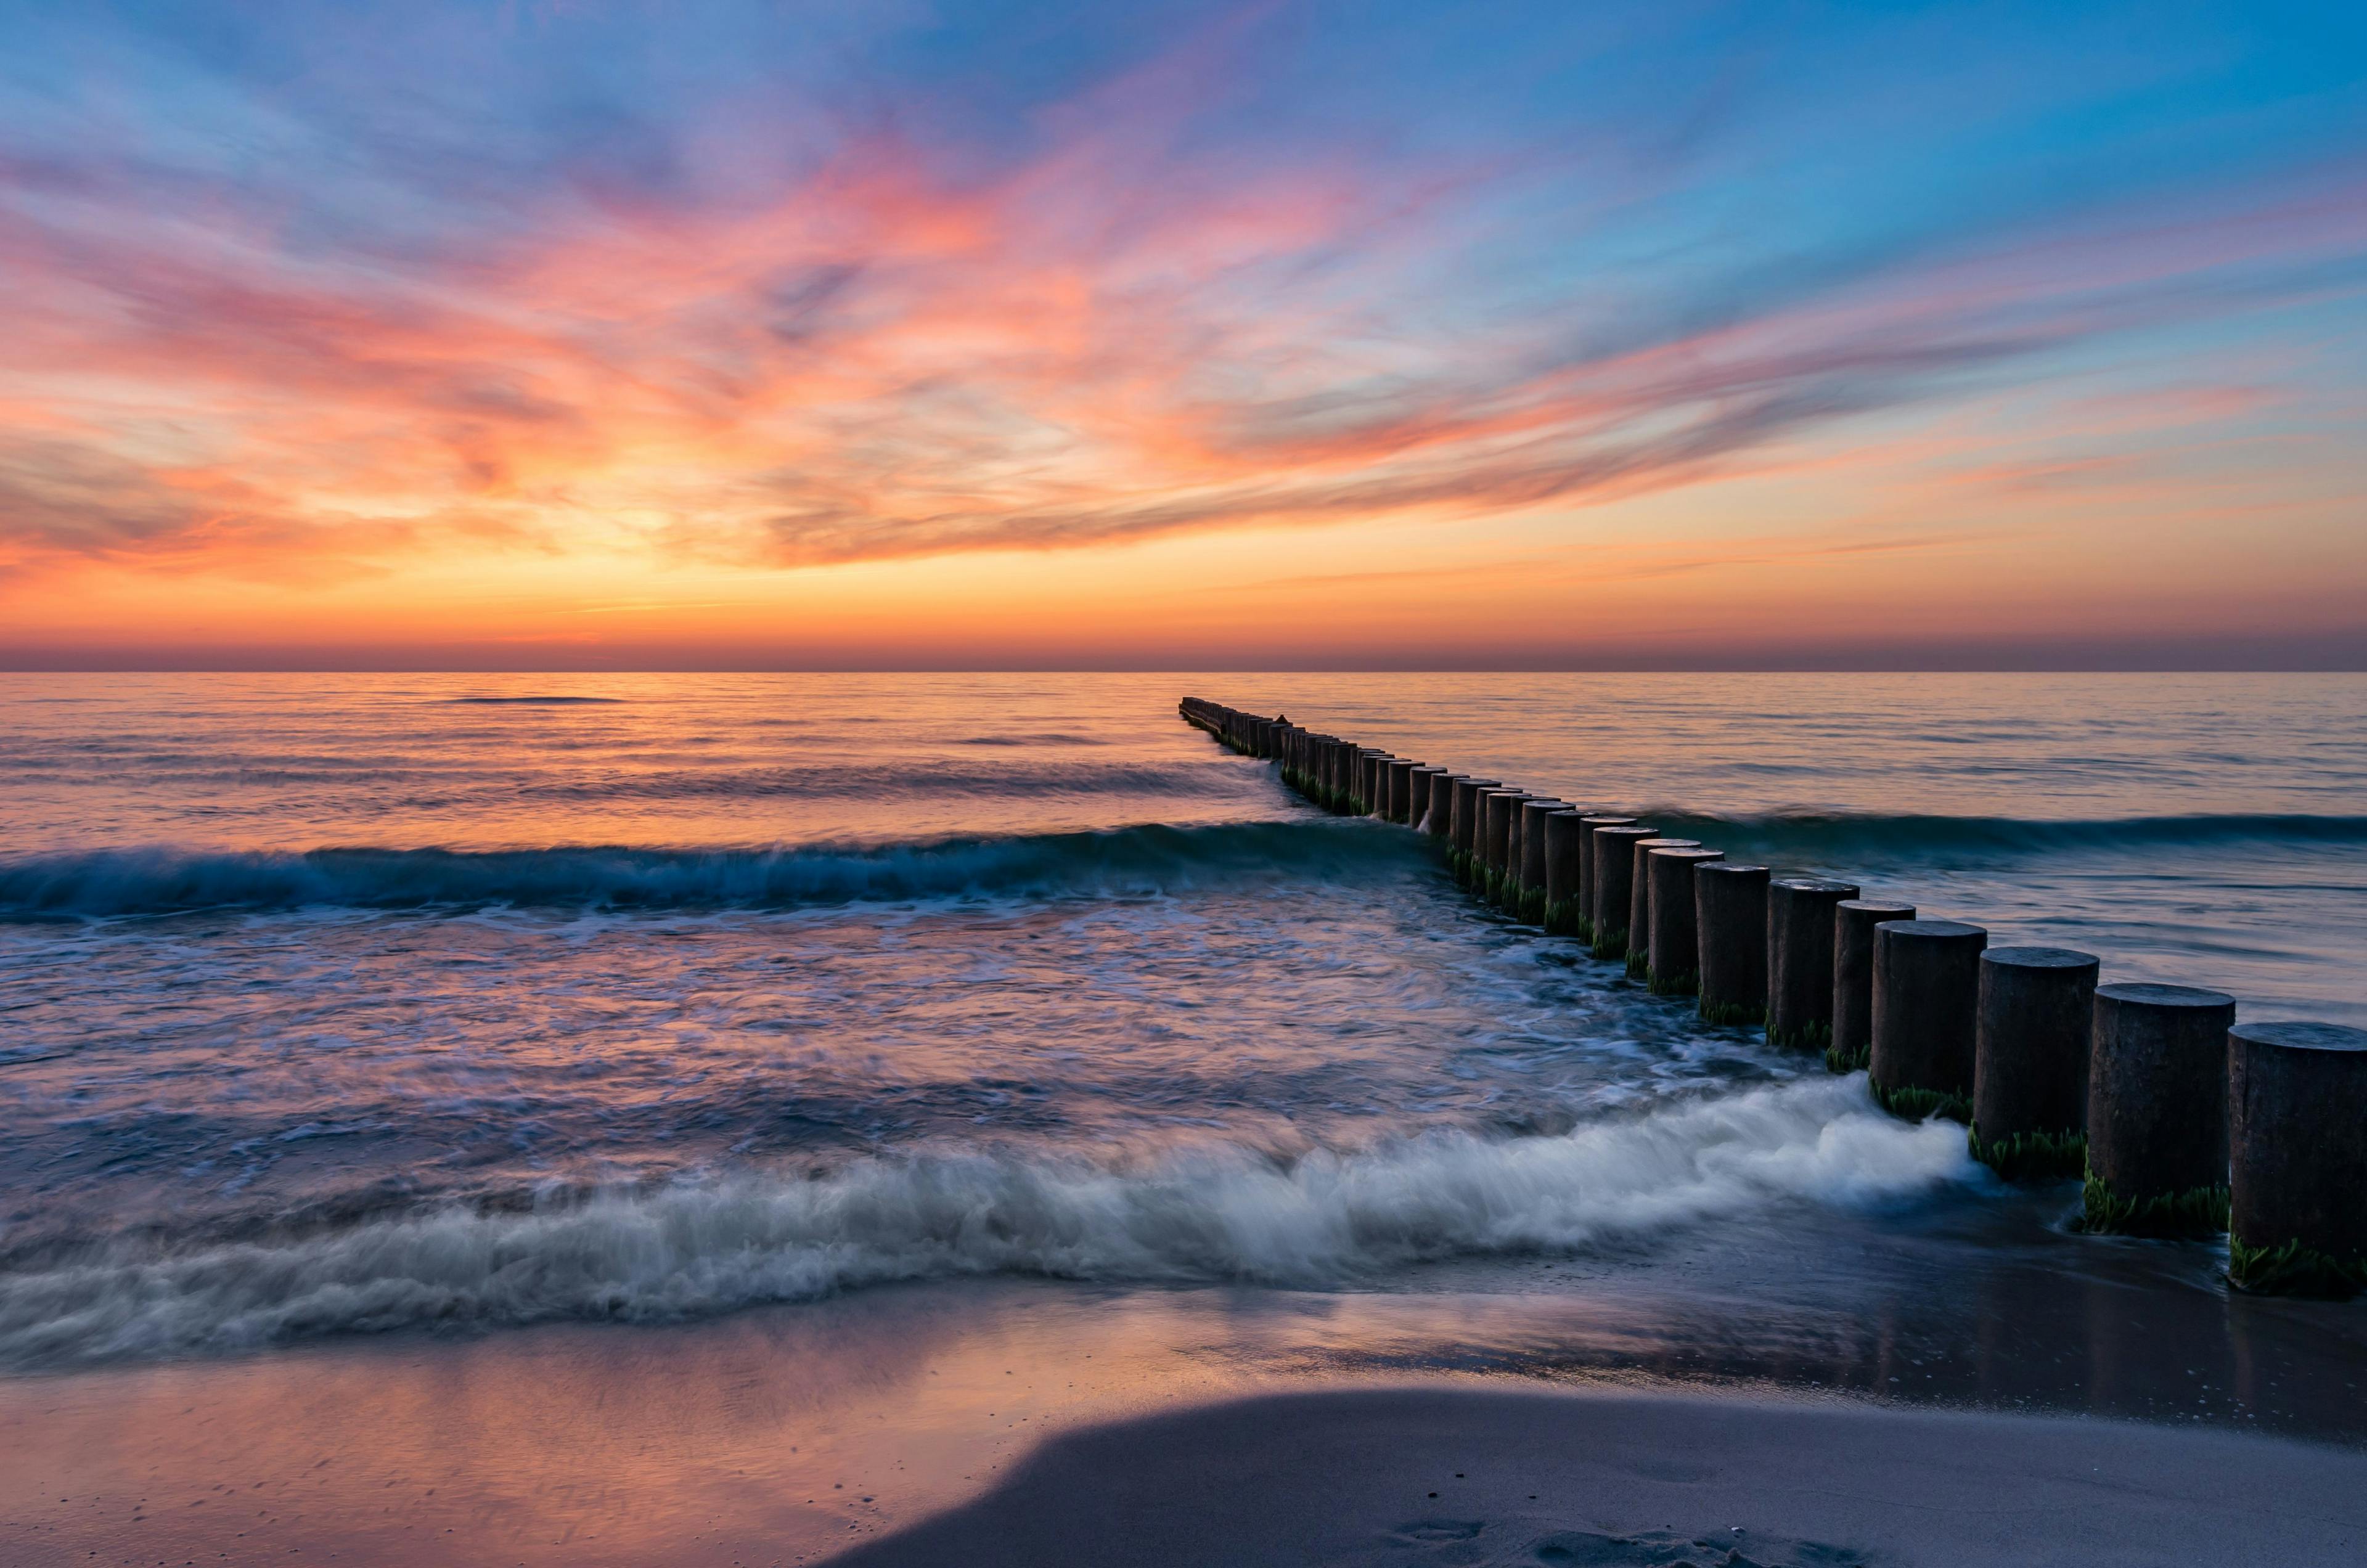 Baltic sea seascape at sunset, Poland, wooden breakwater and waves | Image Credit: © tomeyk - stock.adobe.com